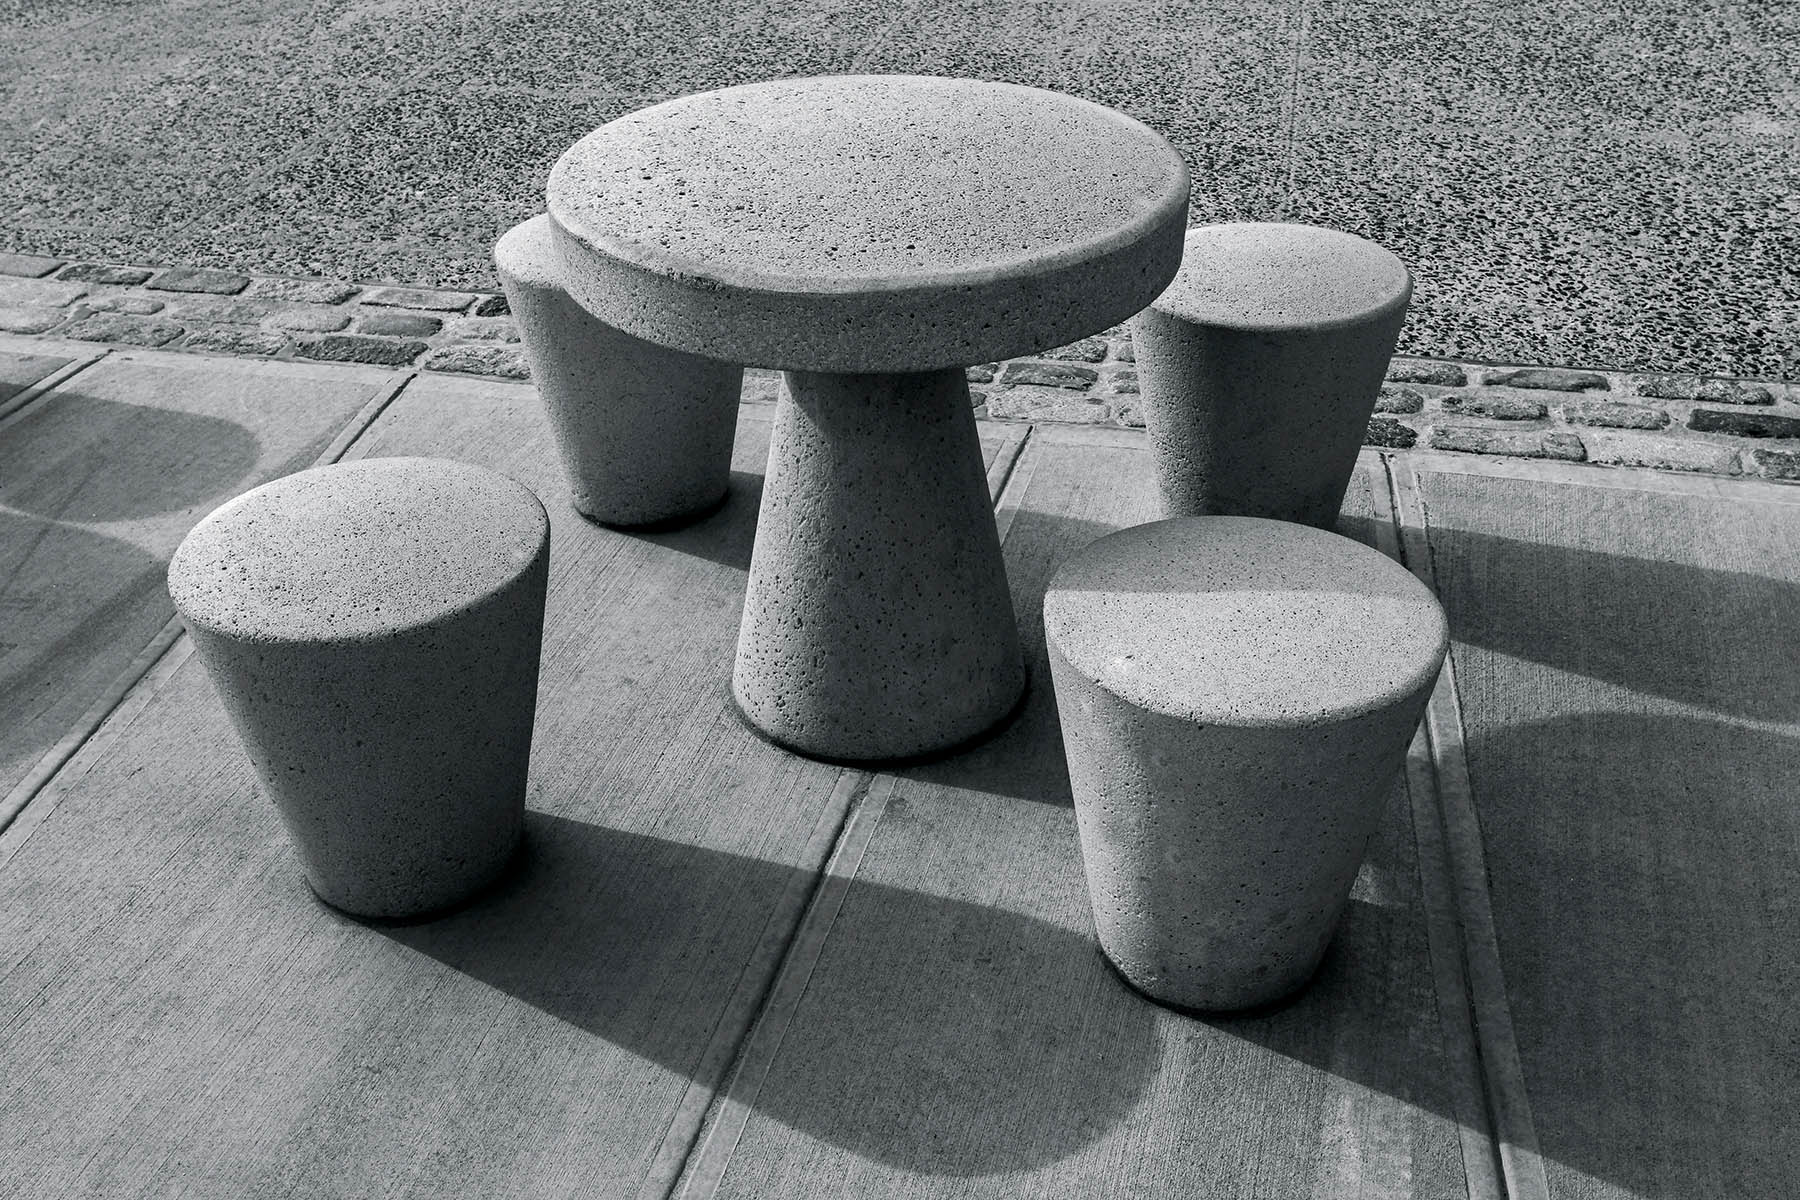 Concrete Furniture: Stylish and Durable Indoor and Outdoor Designs